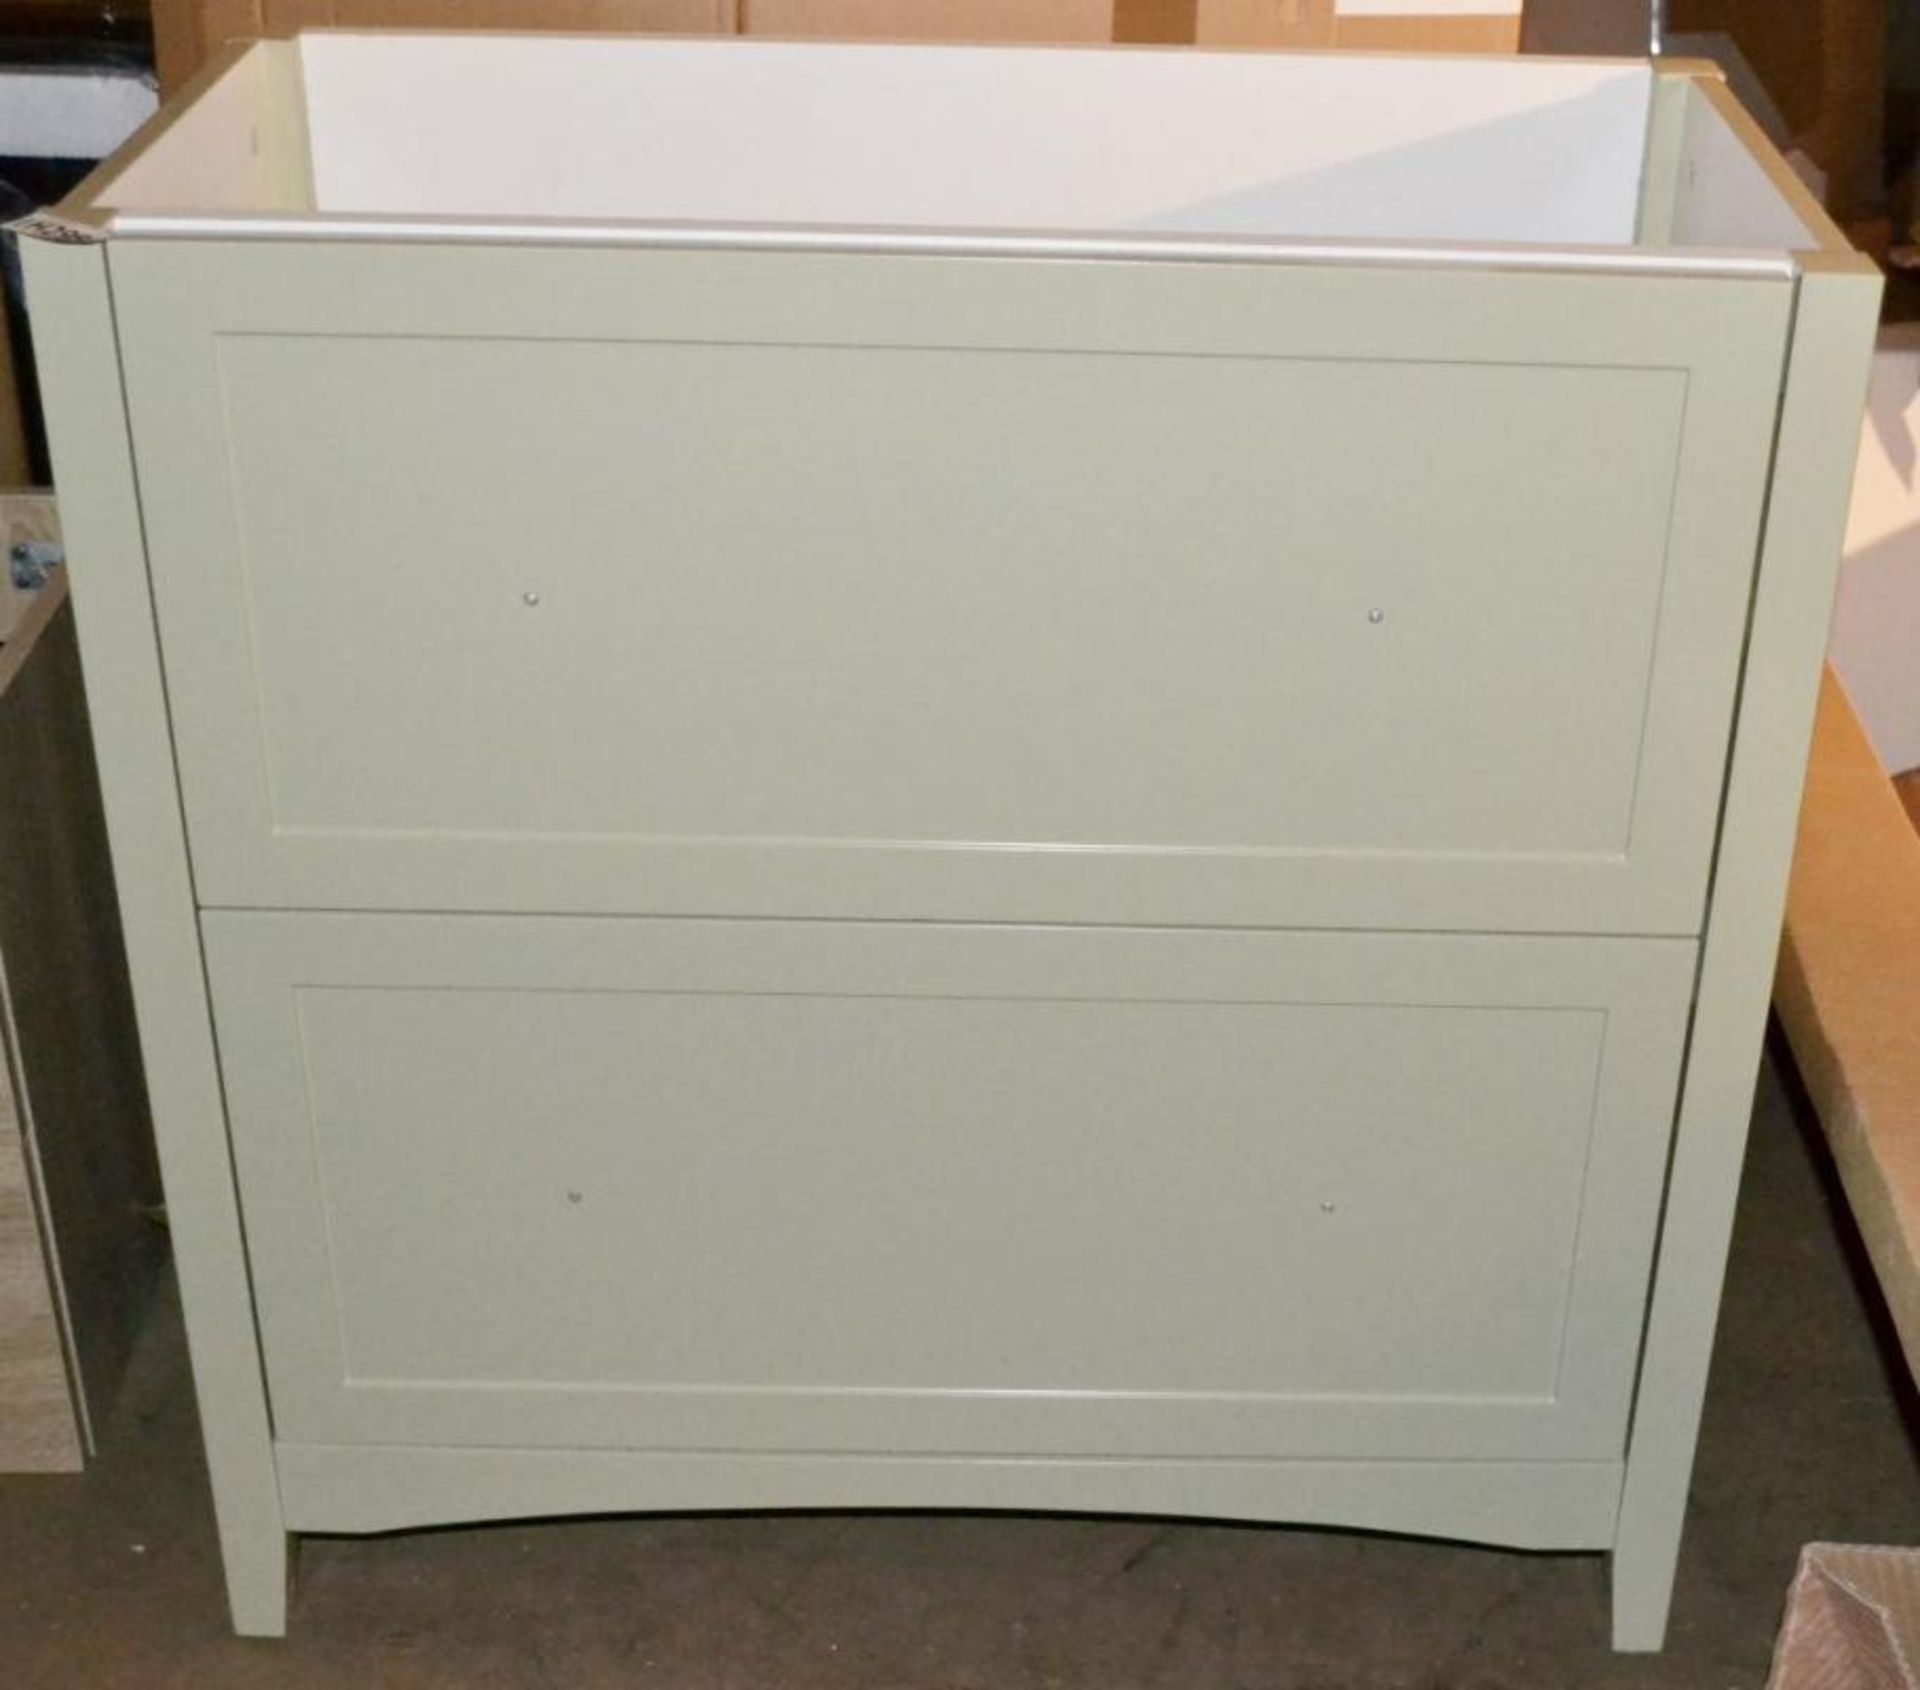 1 x Camberley 800 2-Drawer Soft Close Vanity Unit In Sage Green - New / Unused Stock - Dimensions: W - Image 8 of 8